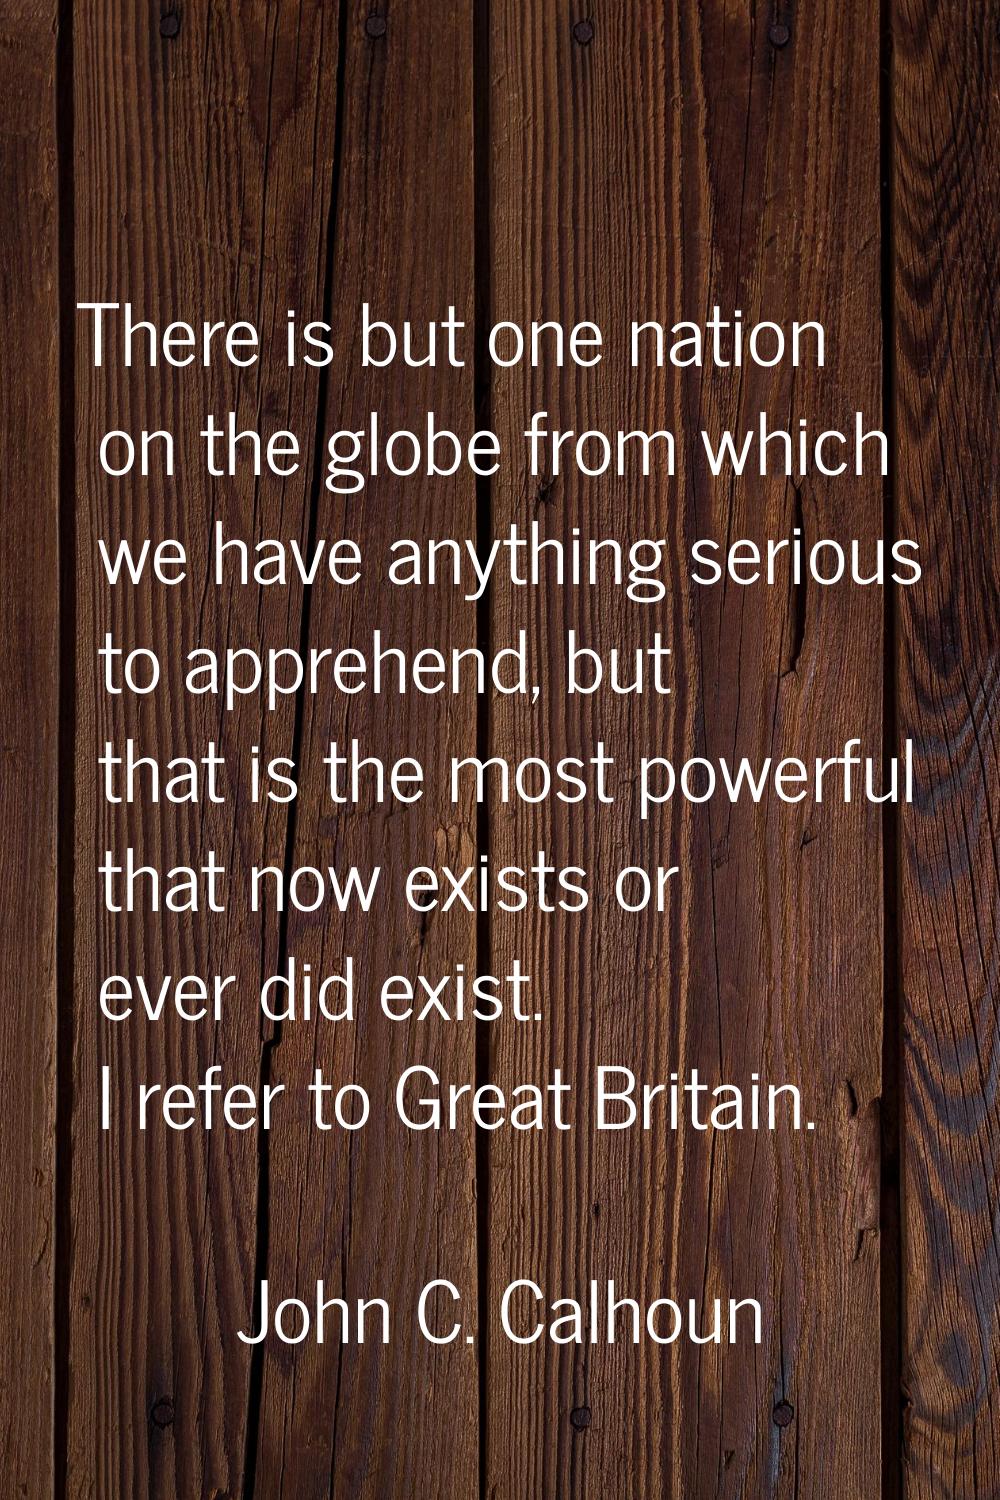 There is but one nation on the globe from which we have anything serious to apprehend, but that is 